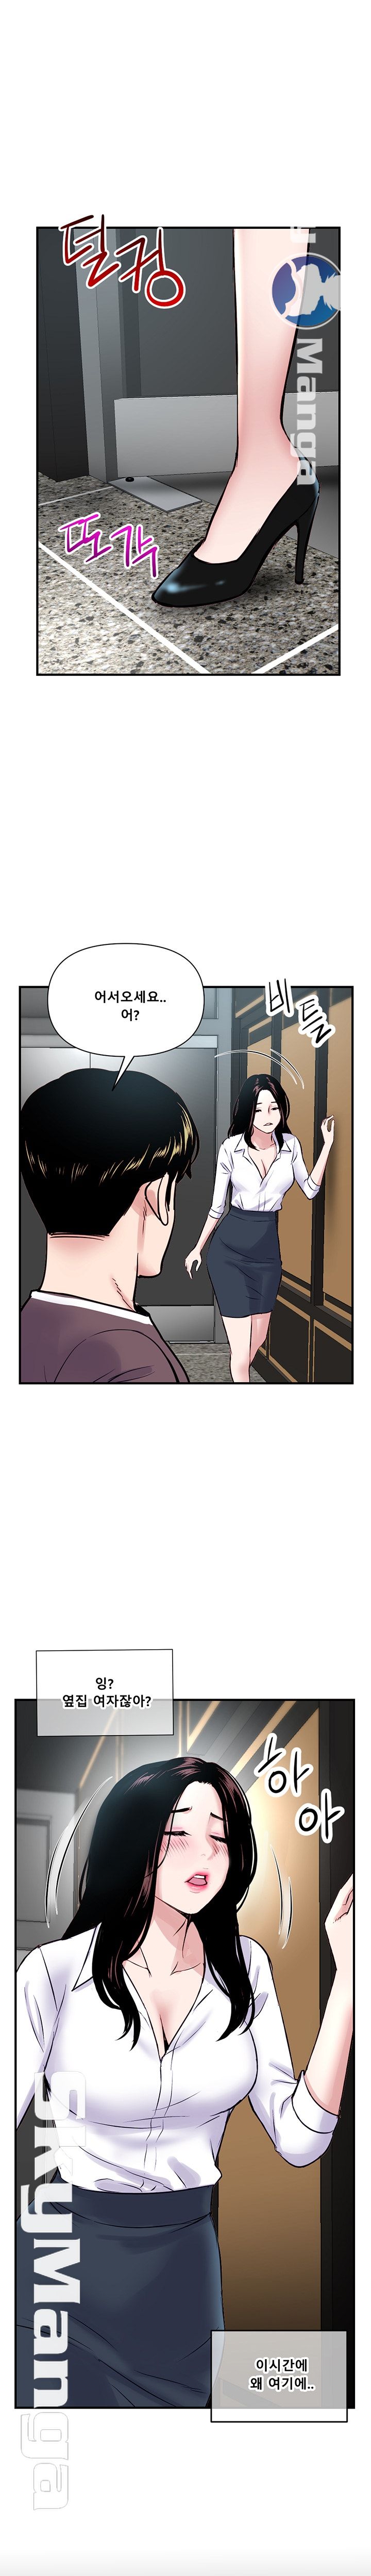 Late night PC Room Raw - Chapter 1 Page 7